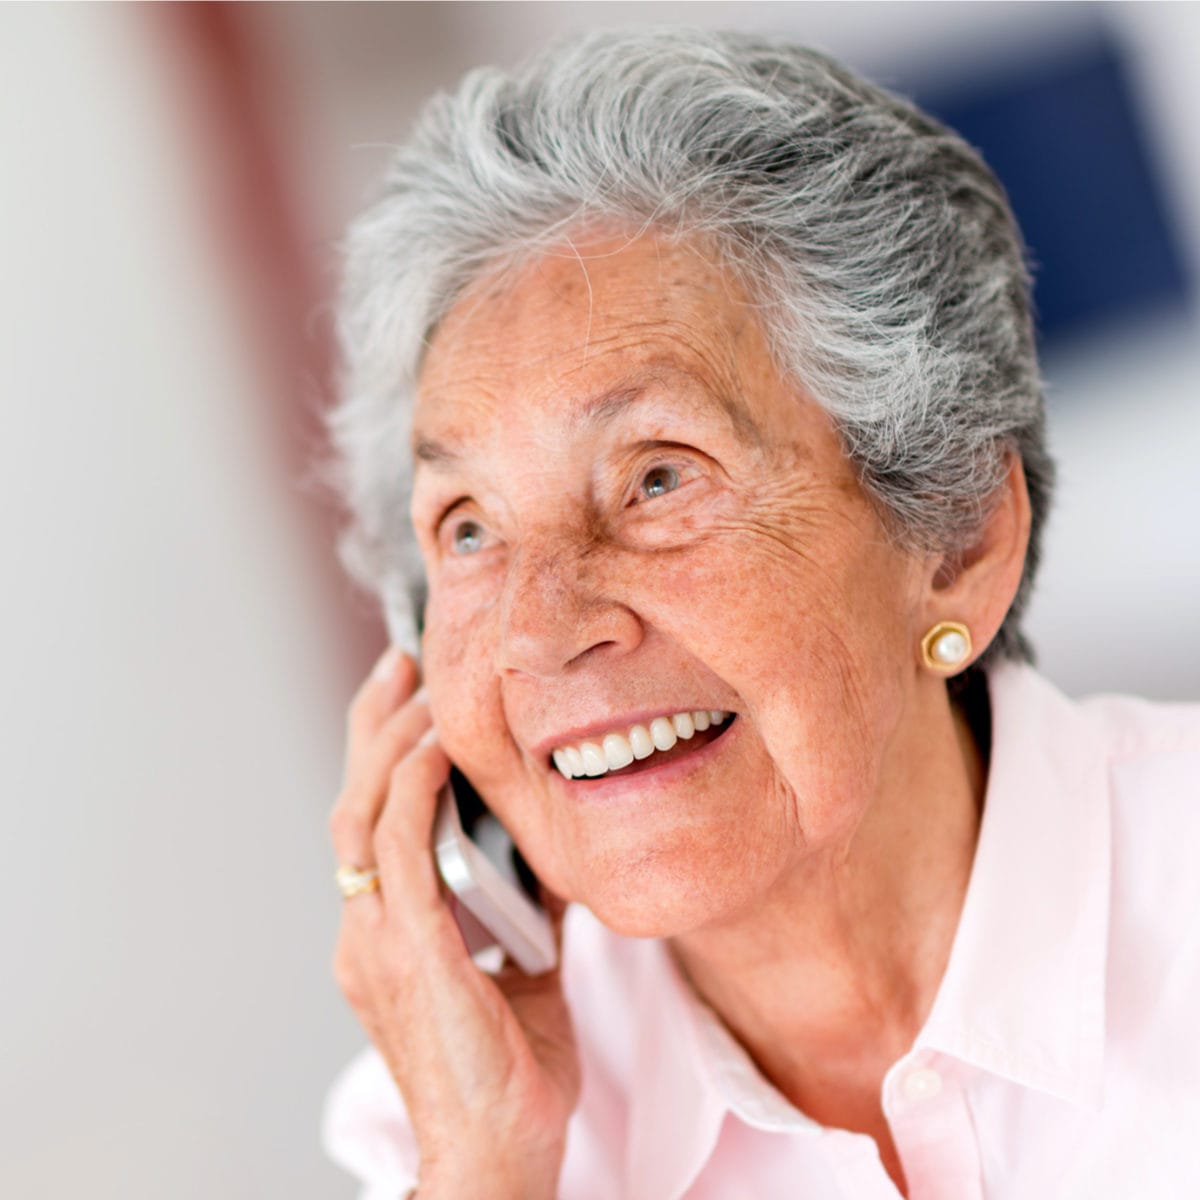 older person on a conference call